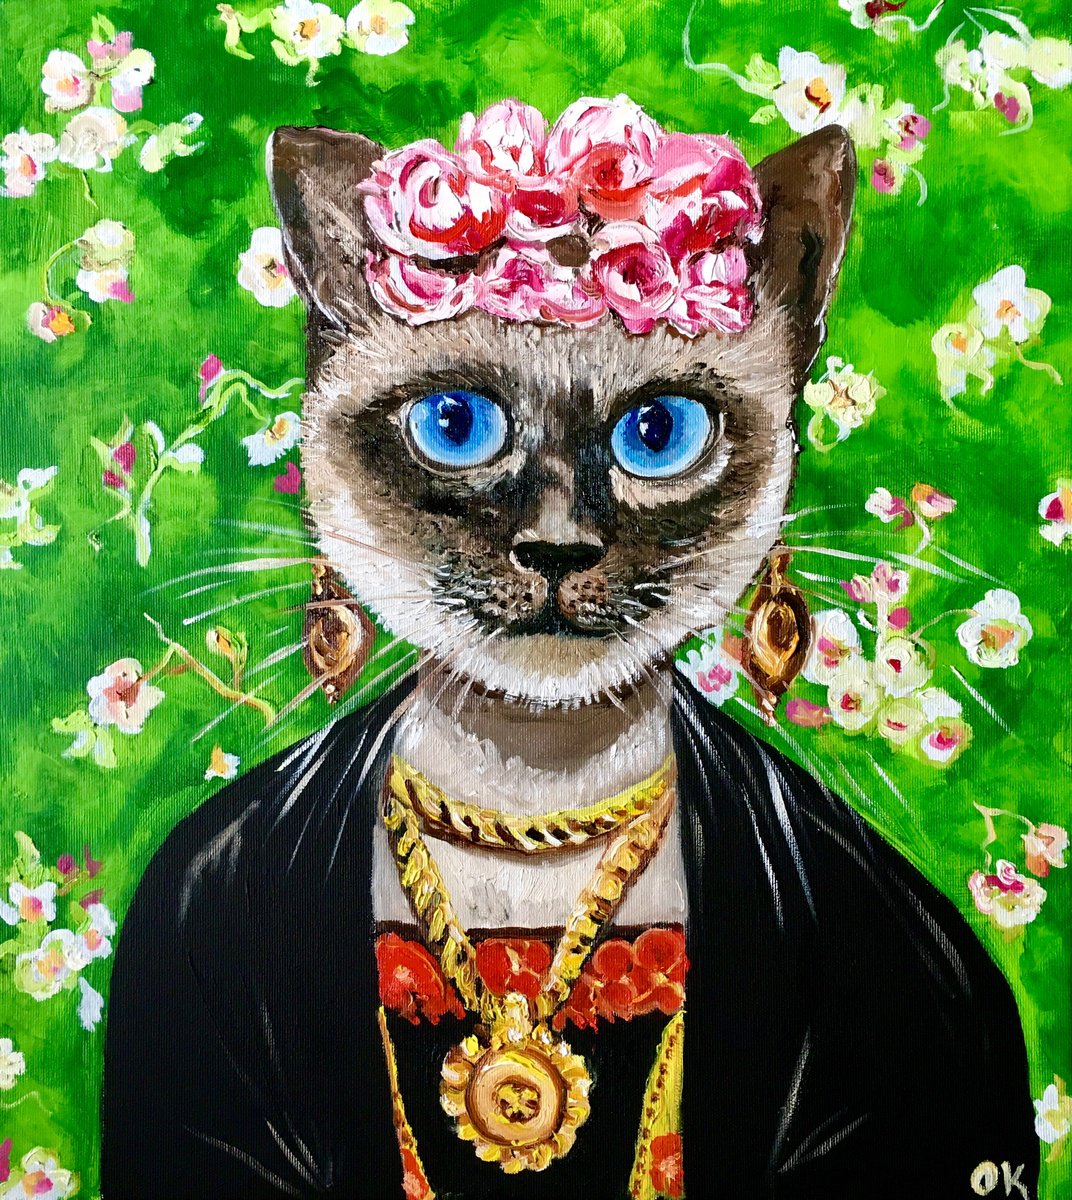 Siamese cat Frida Kahlo inspired by her self-portrait with pink roses . by Olga Koval